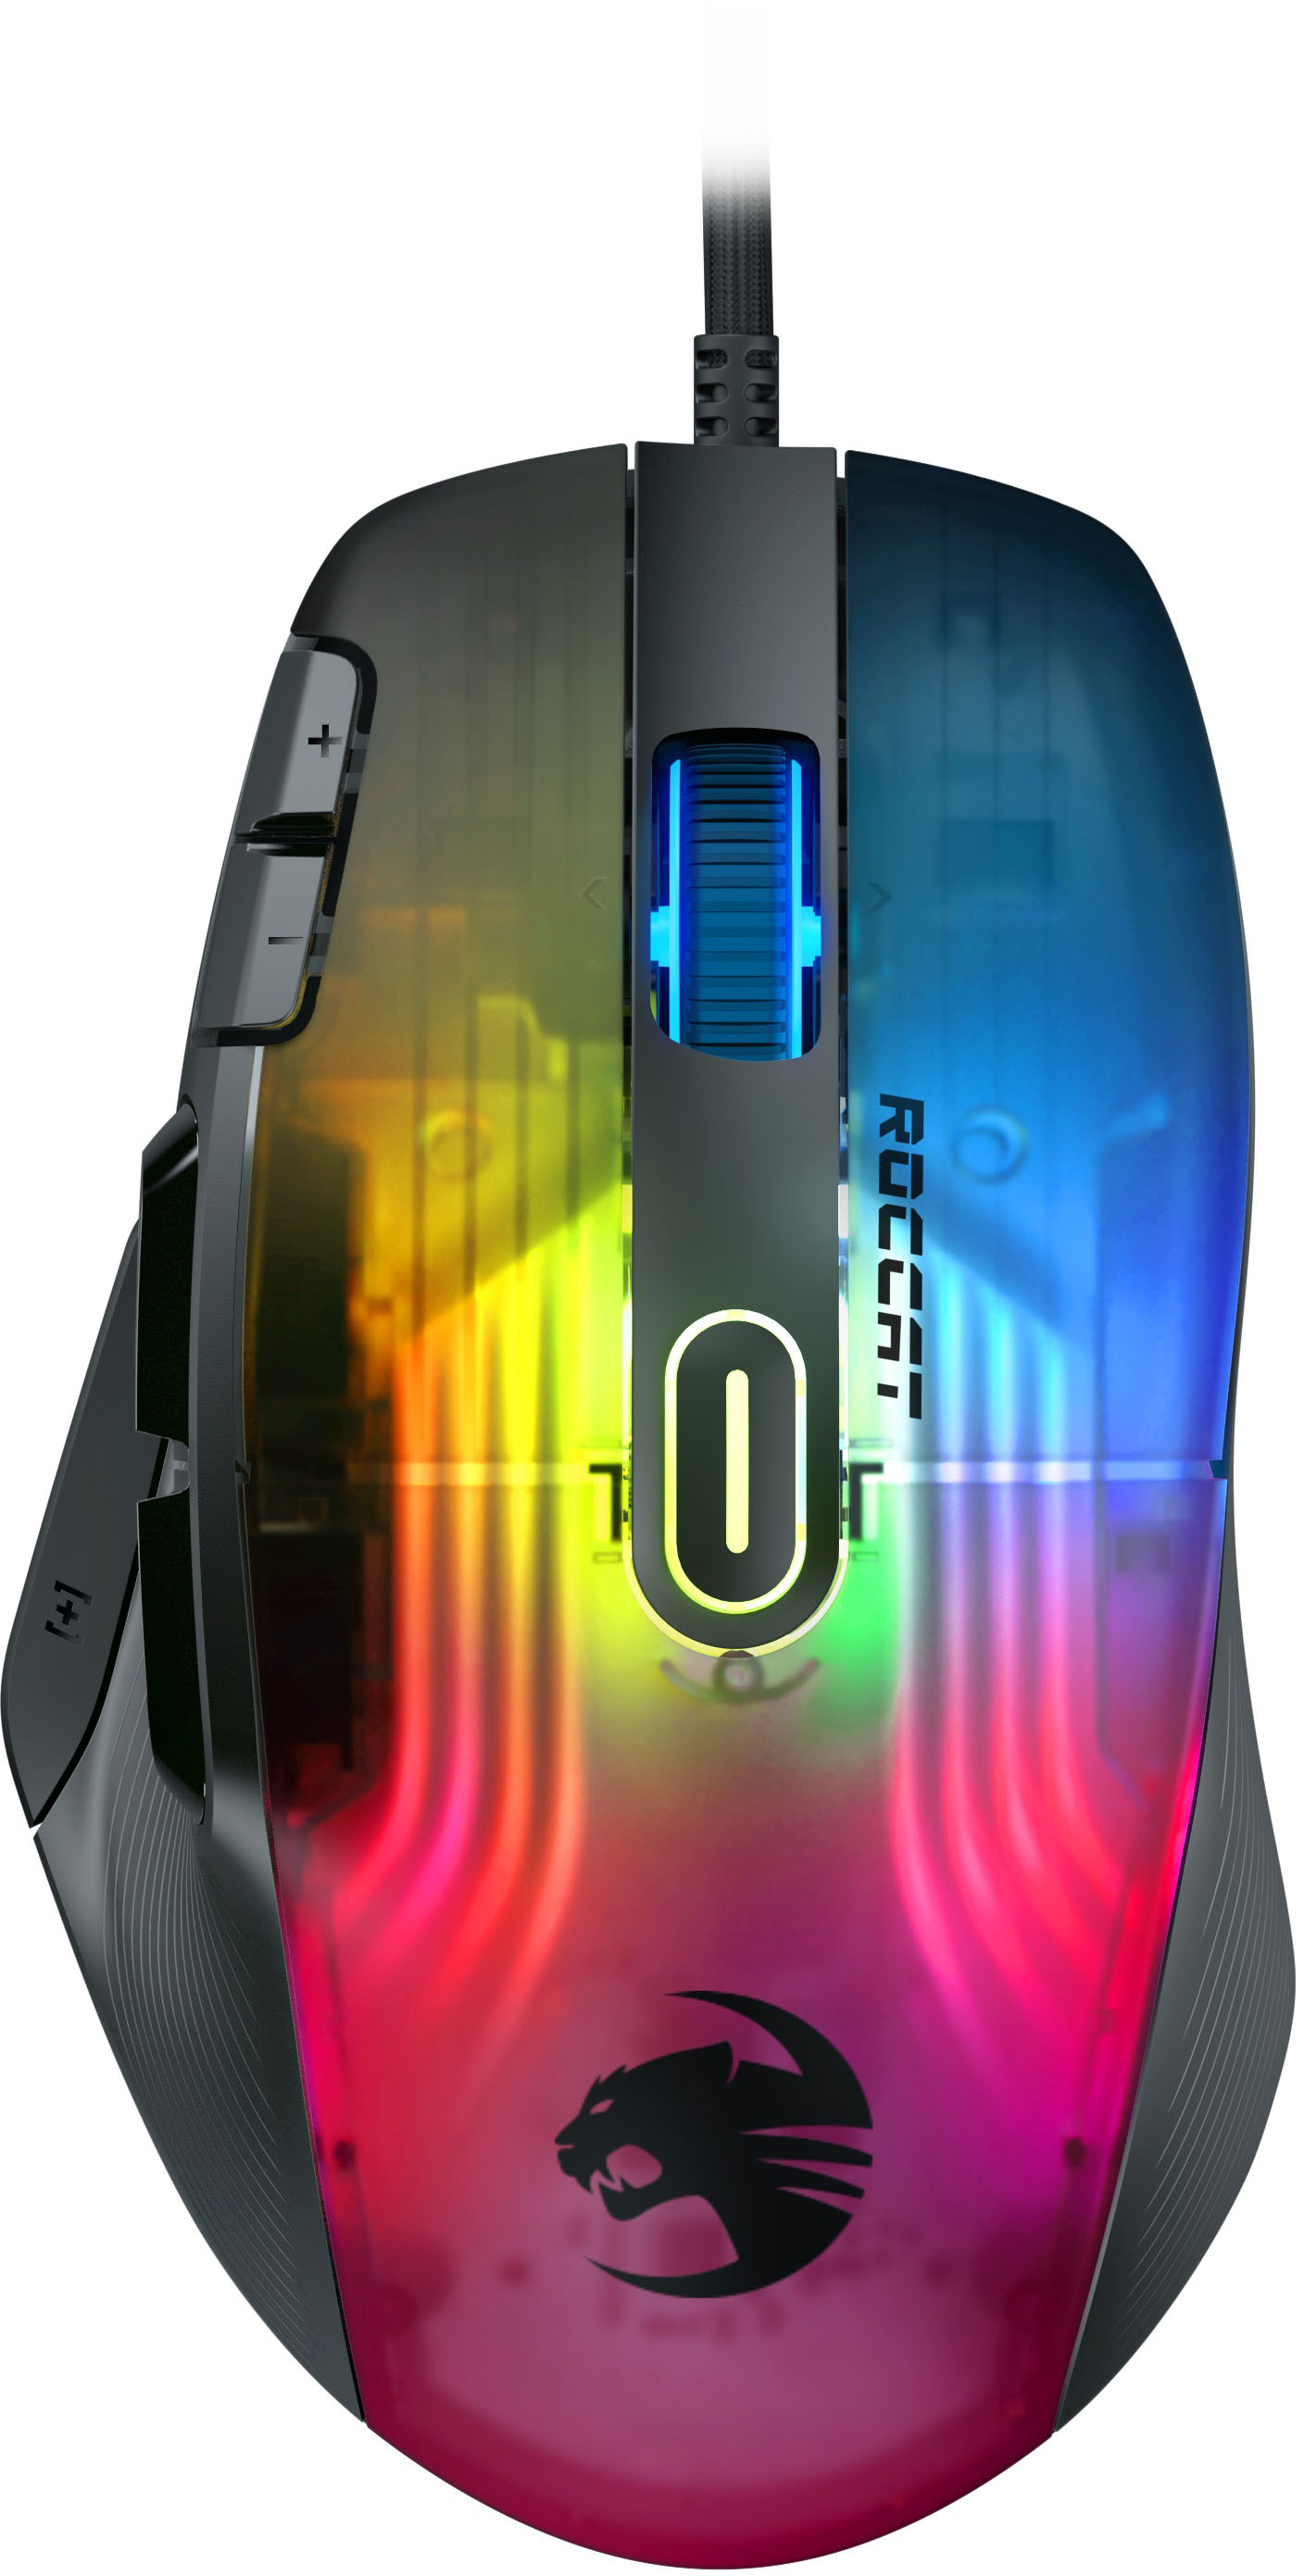 Roccat Kone XP Air Gaming Mouse Review - Houston, We Have Lift Off